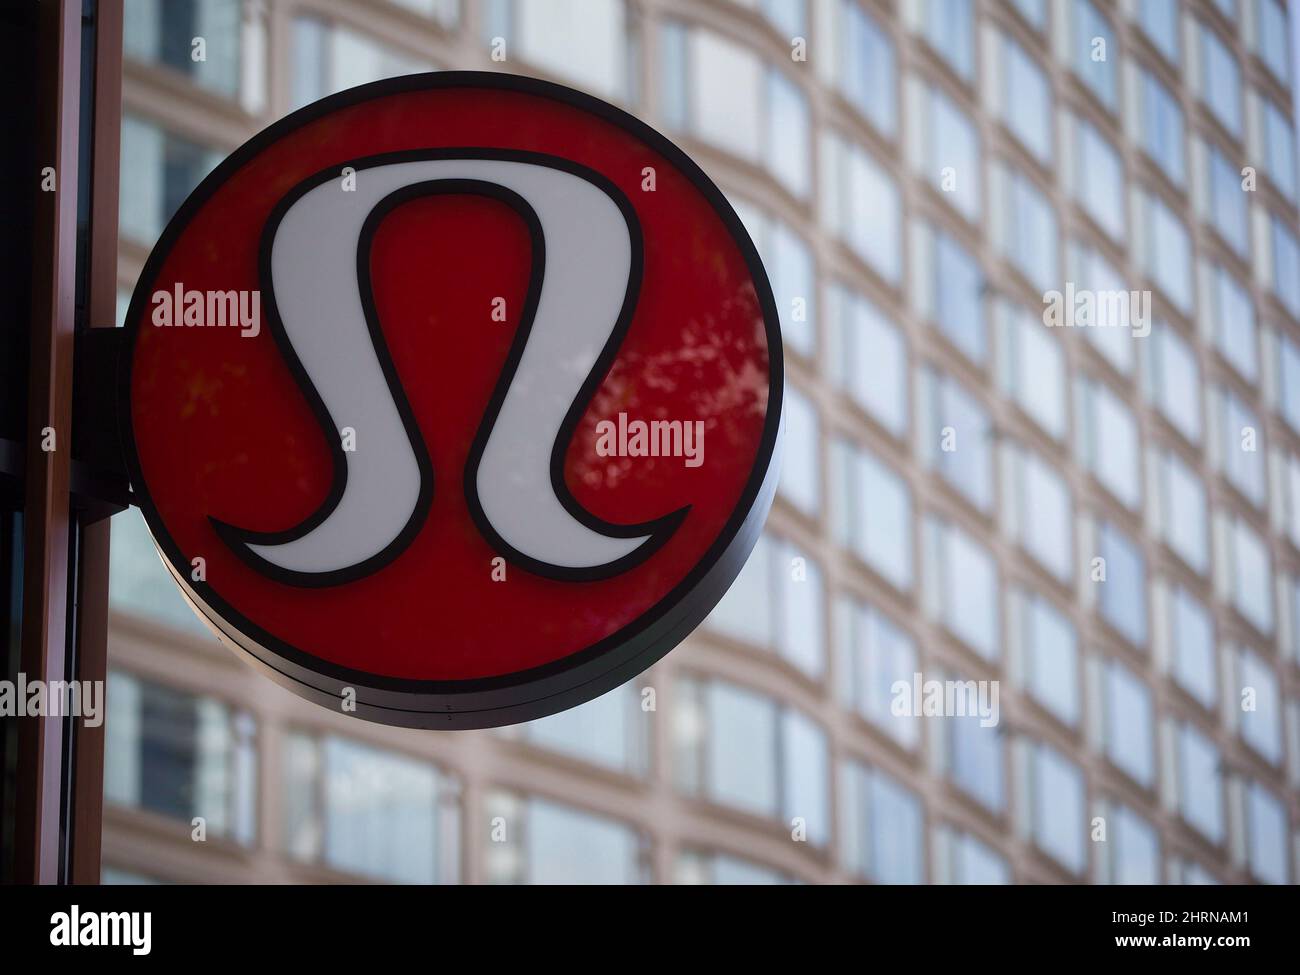 https://c8.alamy.com/comp/2HRNAM1/lululemon-athleticas-logo-is-seen-on-the-outside-of-their-new-flagship-store-on-robson-street-during-its-grand-opening-in-downtown-vancouver-bc-on-thursday-august-21-2014-lululemon-atheltica-inc-says-its-chief-financial-officer-will-leave-the-company-next-month-for-a-position-in-a-different-industry-the-canadian-pressdarryl-dyck-2HRNAM1.jpg